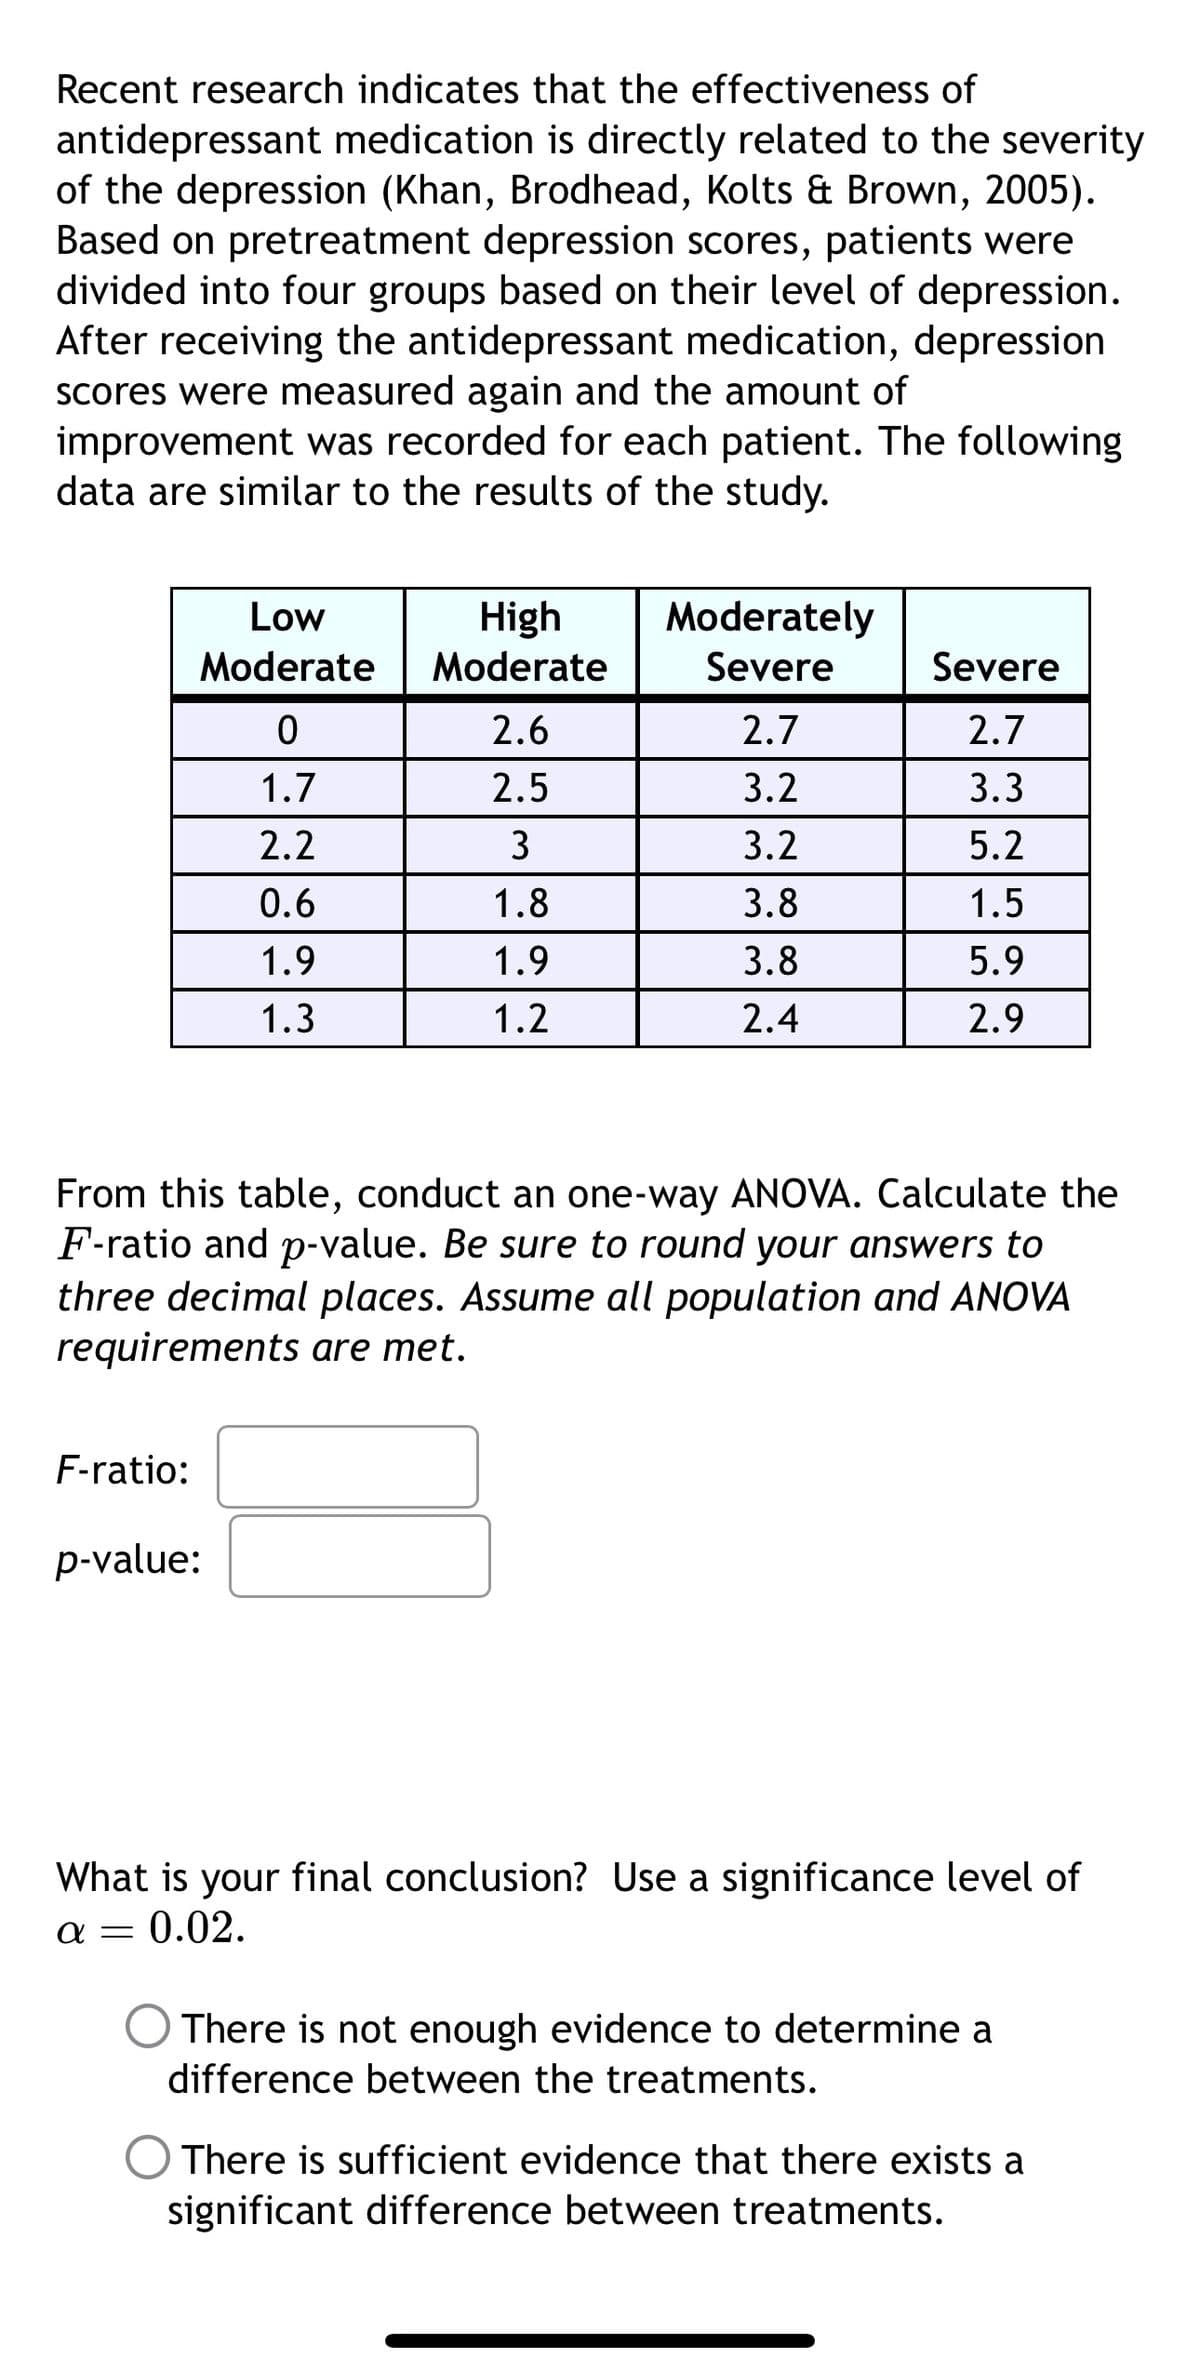 Recent research indicates that the effectiveness of
antidepressant medication is directly related to the severity
of the depression (Khan, Brodhead, Kolts & Brown, 2005).
Based on pretreatment depression scores, patients were
divided into four groups based on their level of depression.
After receiving the antidepressant medication, depression
scores were measured again and the amount of
improvement was recorded for each patient. The following
data are similar to the results of the study.
Low
High
Moderate Moderate
Moderately
Severe
Severe
0
2.6
2.7
2.7
1.7
2.5
3.2
3.3
2.2
3
3.2
5.2
0.6
1.8
3.8
1.5
1.9
1.9
3.8
5.9
1.3
1.2
2.4
2.9
From this table, conduct an one-way ANOVA. Calculate the
F-ratio and p-value. Be sure to round your answers to
three decimal places. Assume all population and ANOVA
requirements are met.
F-ratio:
p-value:
What is your final conclusion? Use a significance level of
απ 0.02.
There is not enough evidence to determine a
difference between the treatments.
There is sufficient evidence that there exists a
significant difference between treatments.